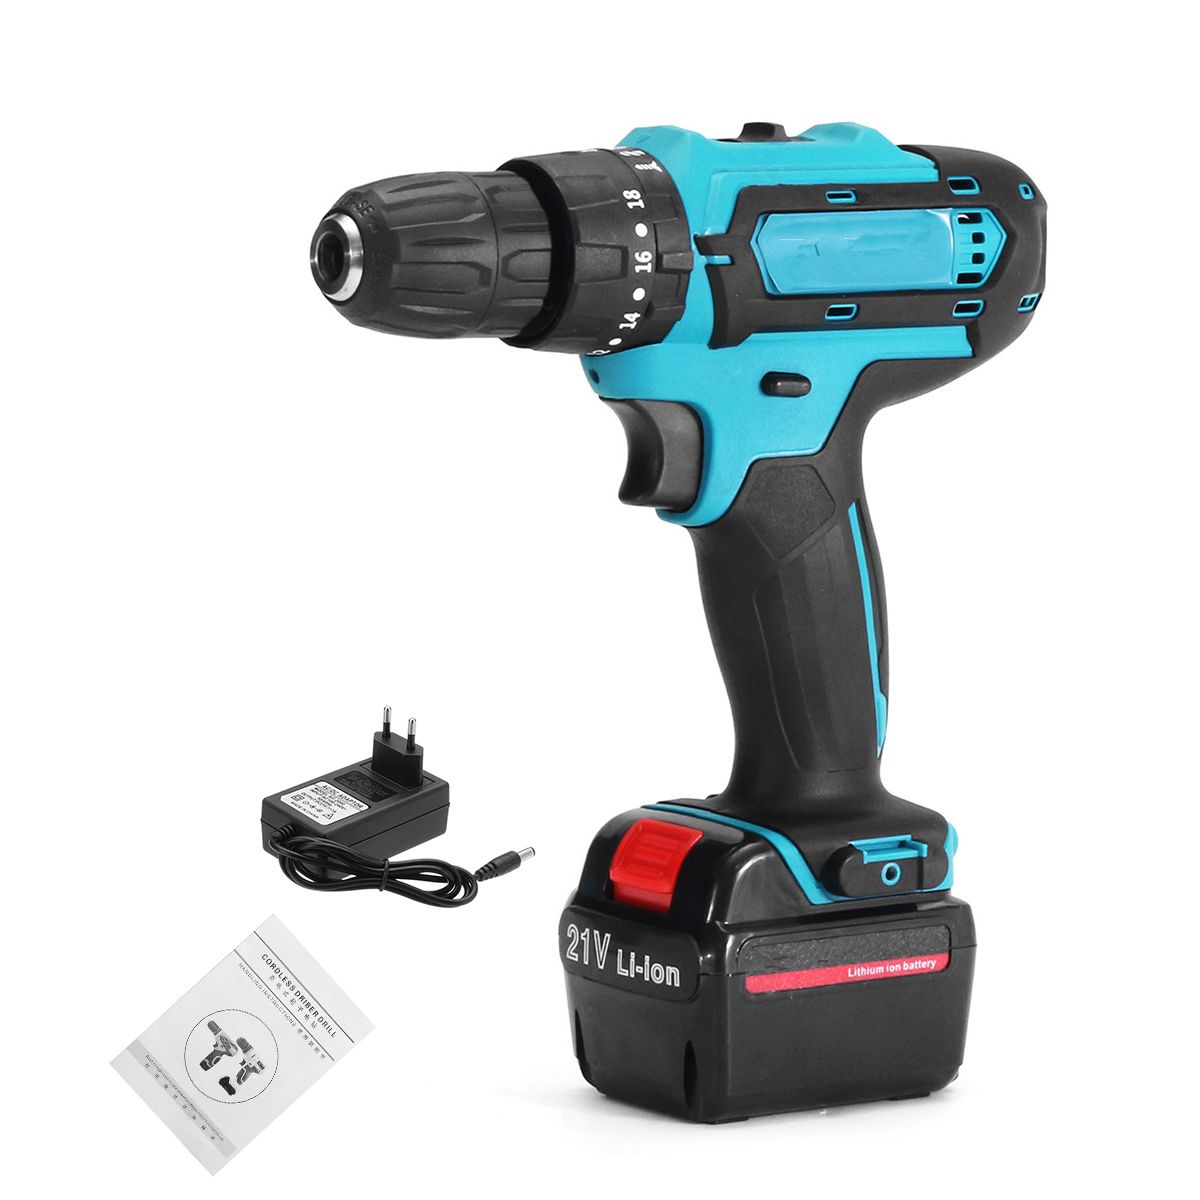 12V-Cordless-Electric-Impact-Drill-Multi-function-Hand-Hammer-Screwdriver-Lithium-Battery-Rechargabl-1452371